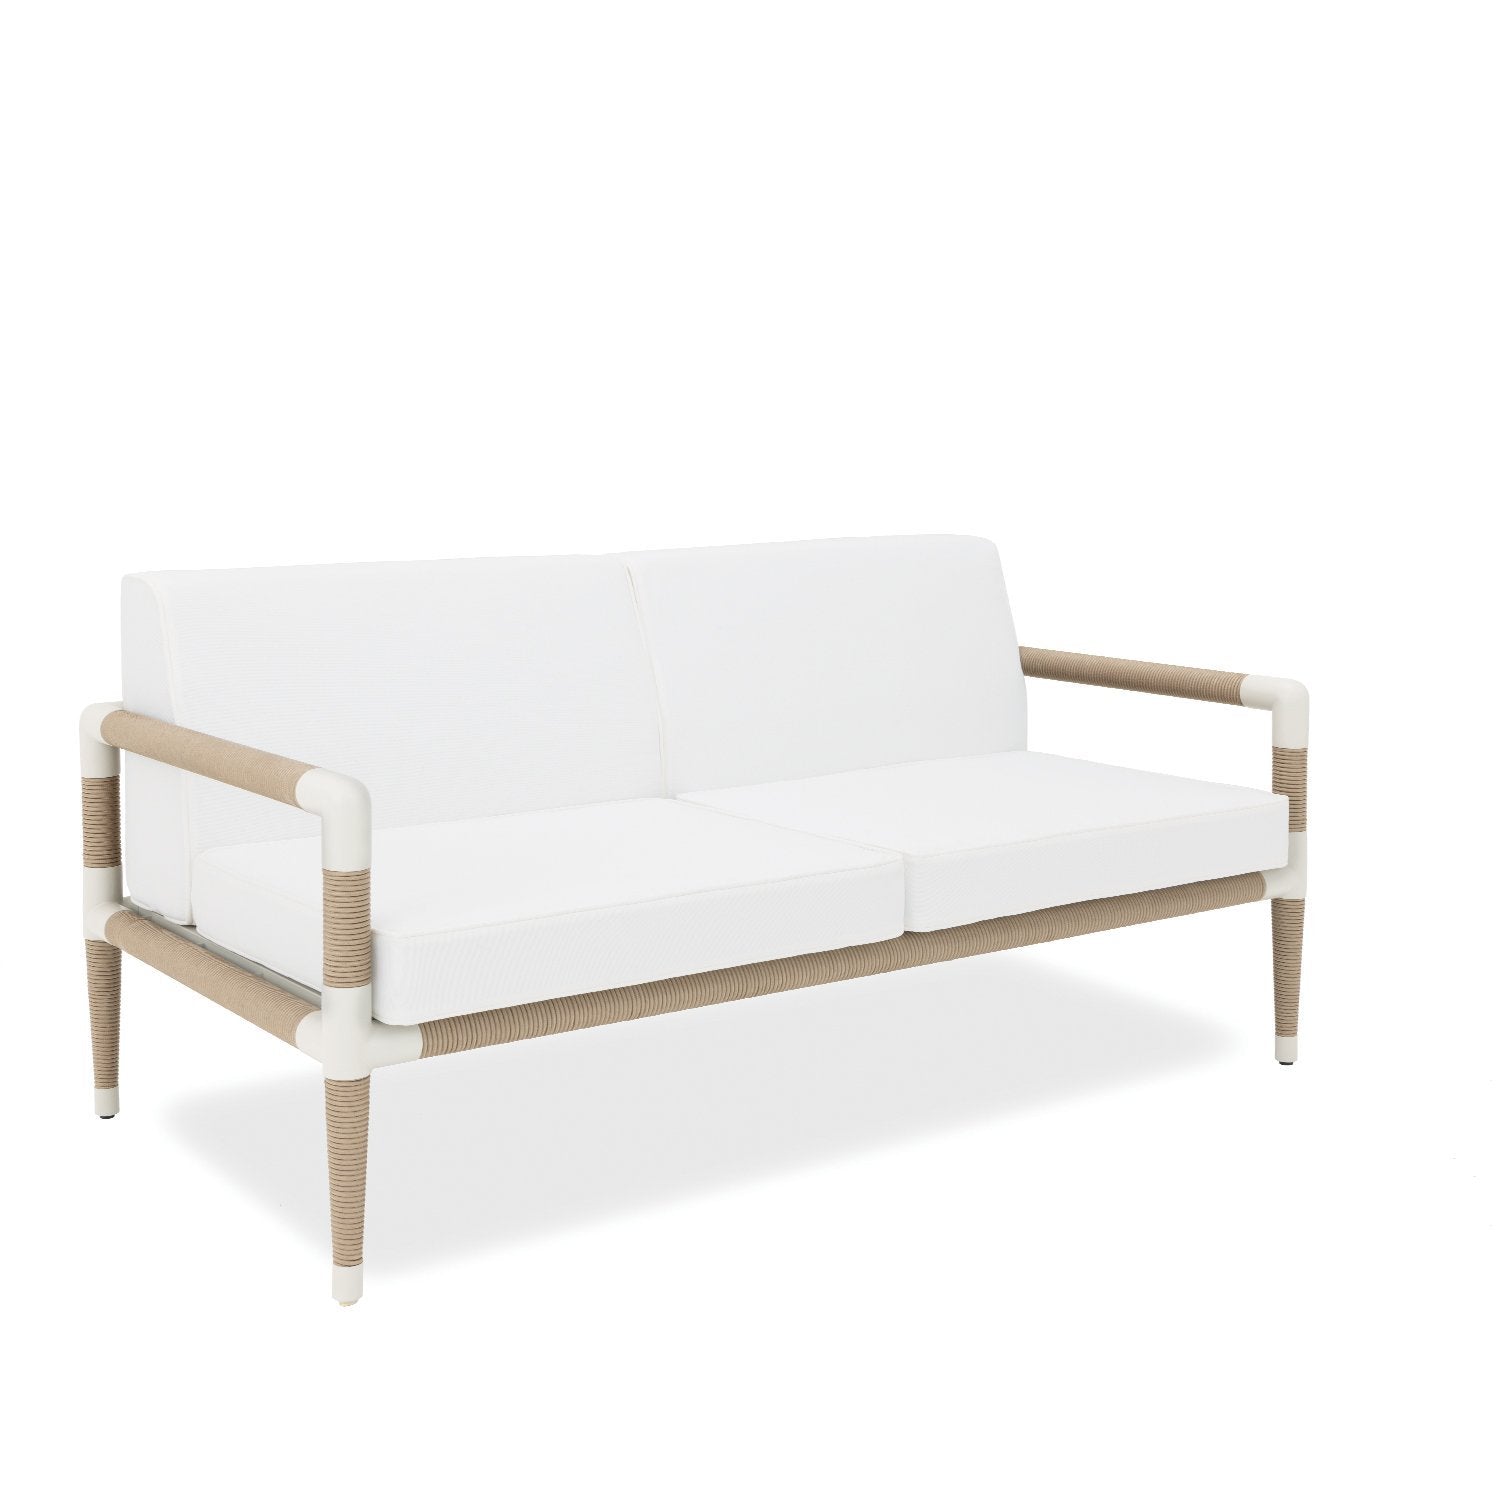 Marina two seat sofa with Pearl frame